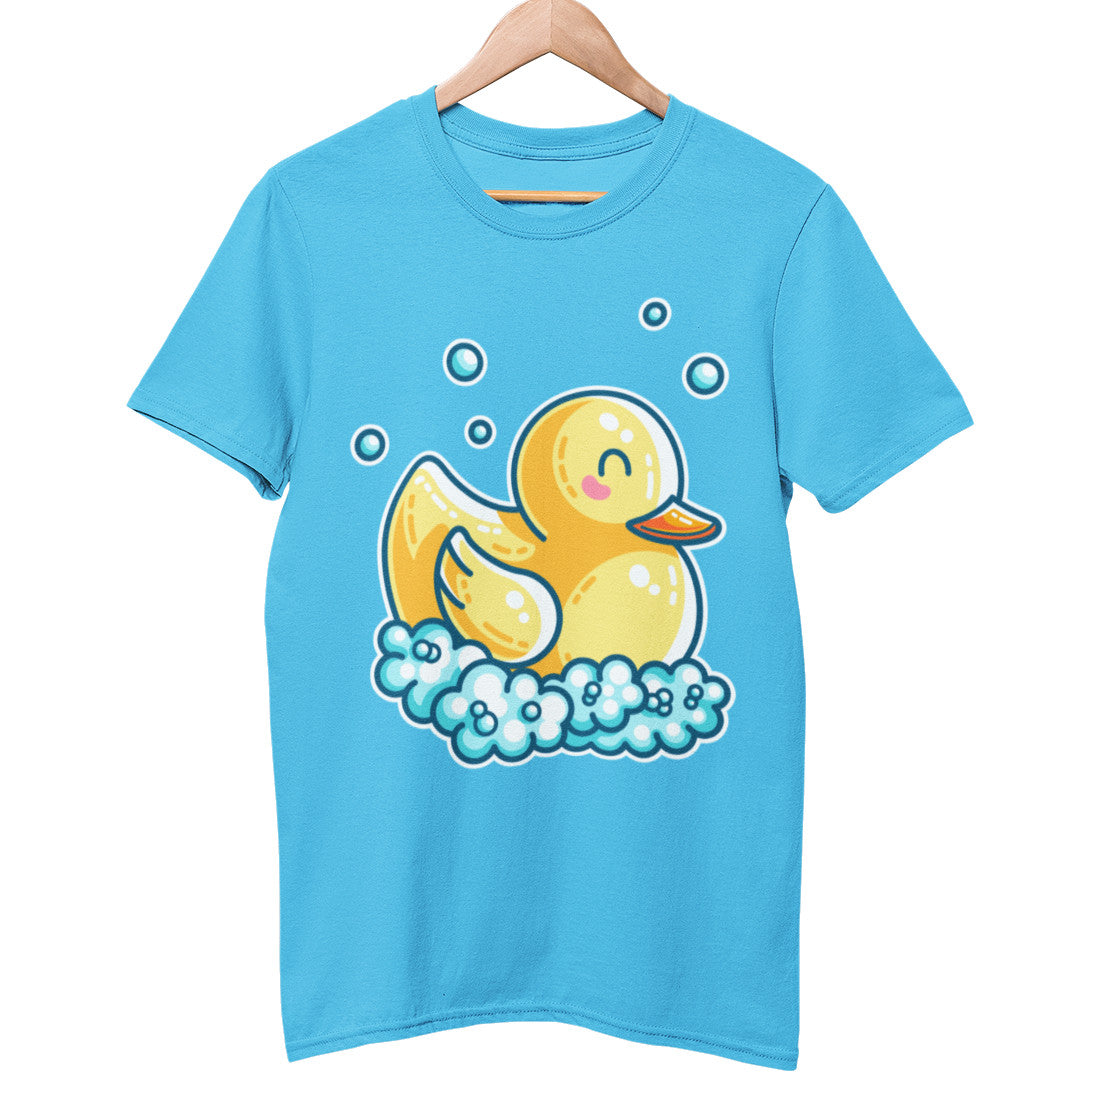 An aqua blue coloured unisex crewneck t-shirt on a hanger with a design on its chest of a kawaii cute yellow rubber duck sitting in a bed of bubbles and with a few bubbles floating around the duck who is seen side on facing to the right